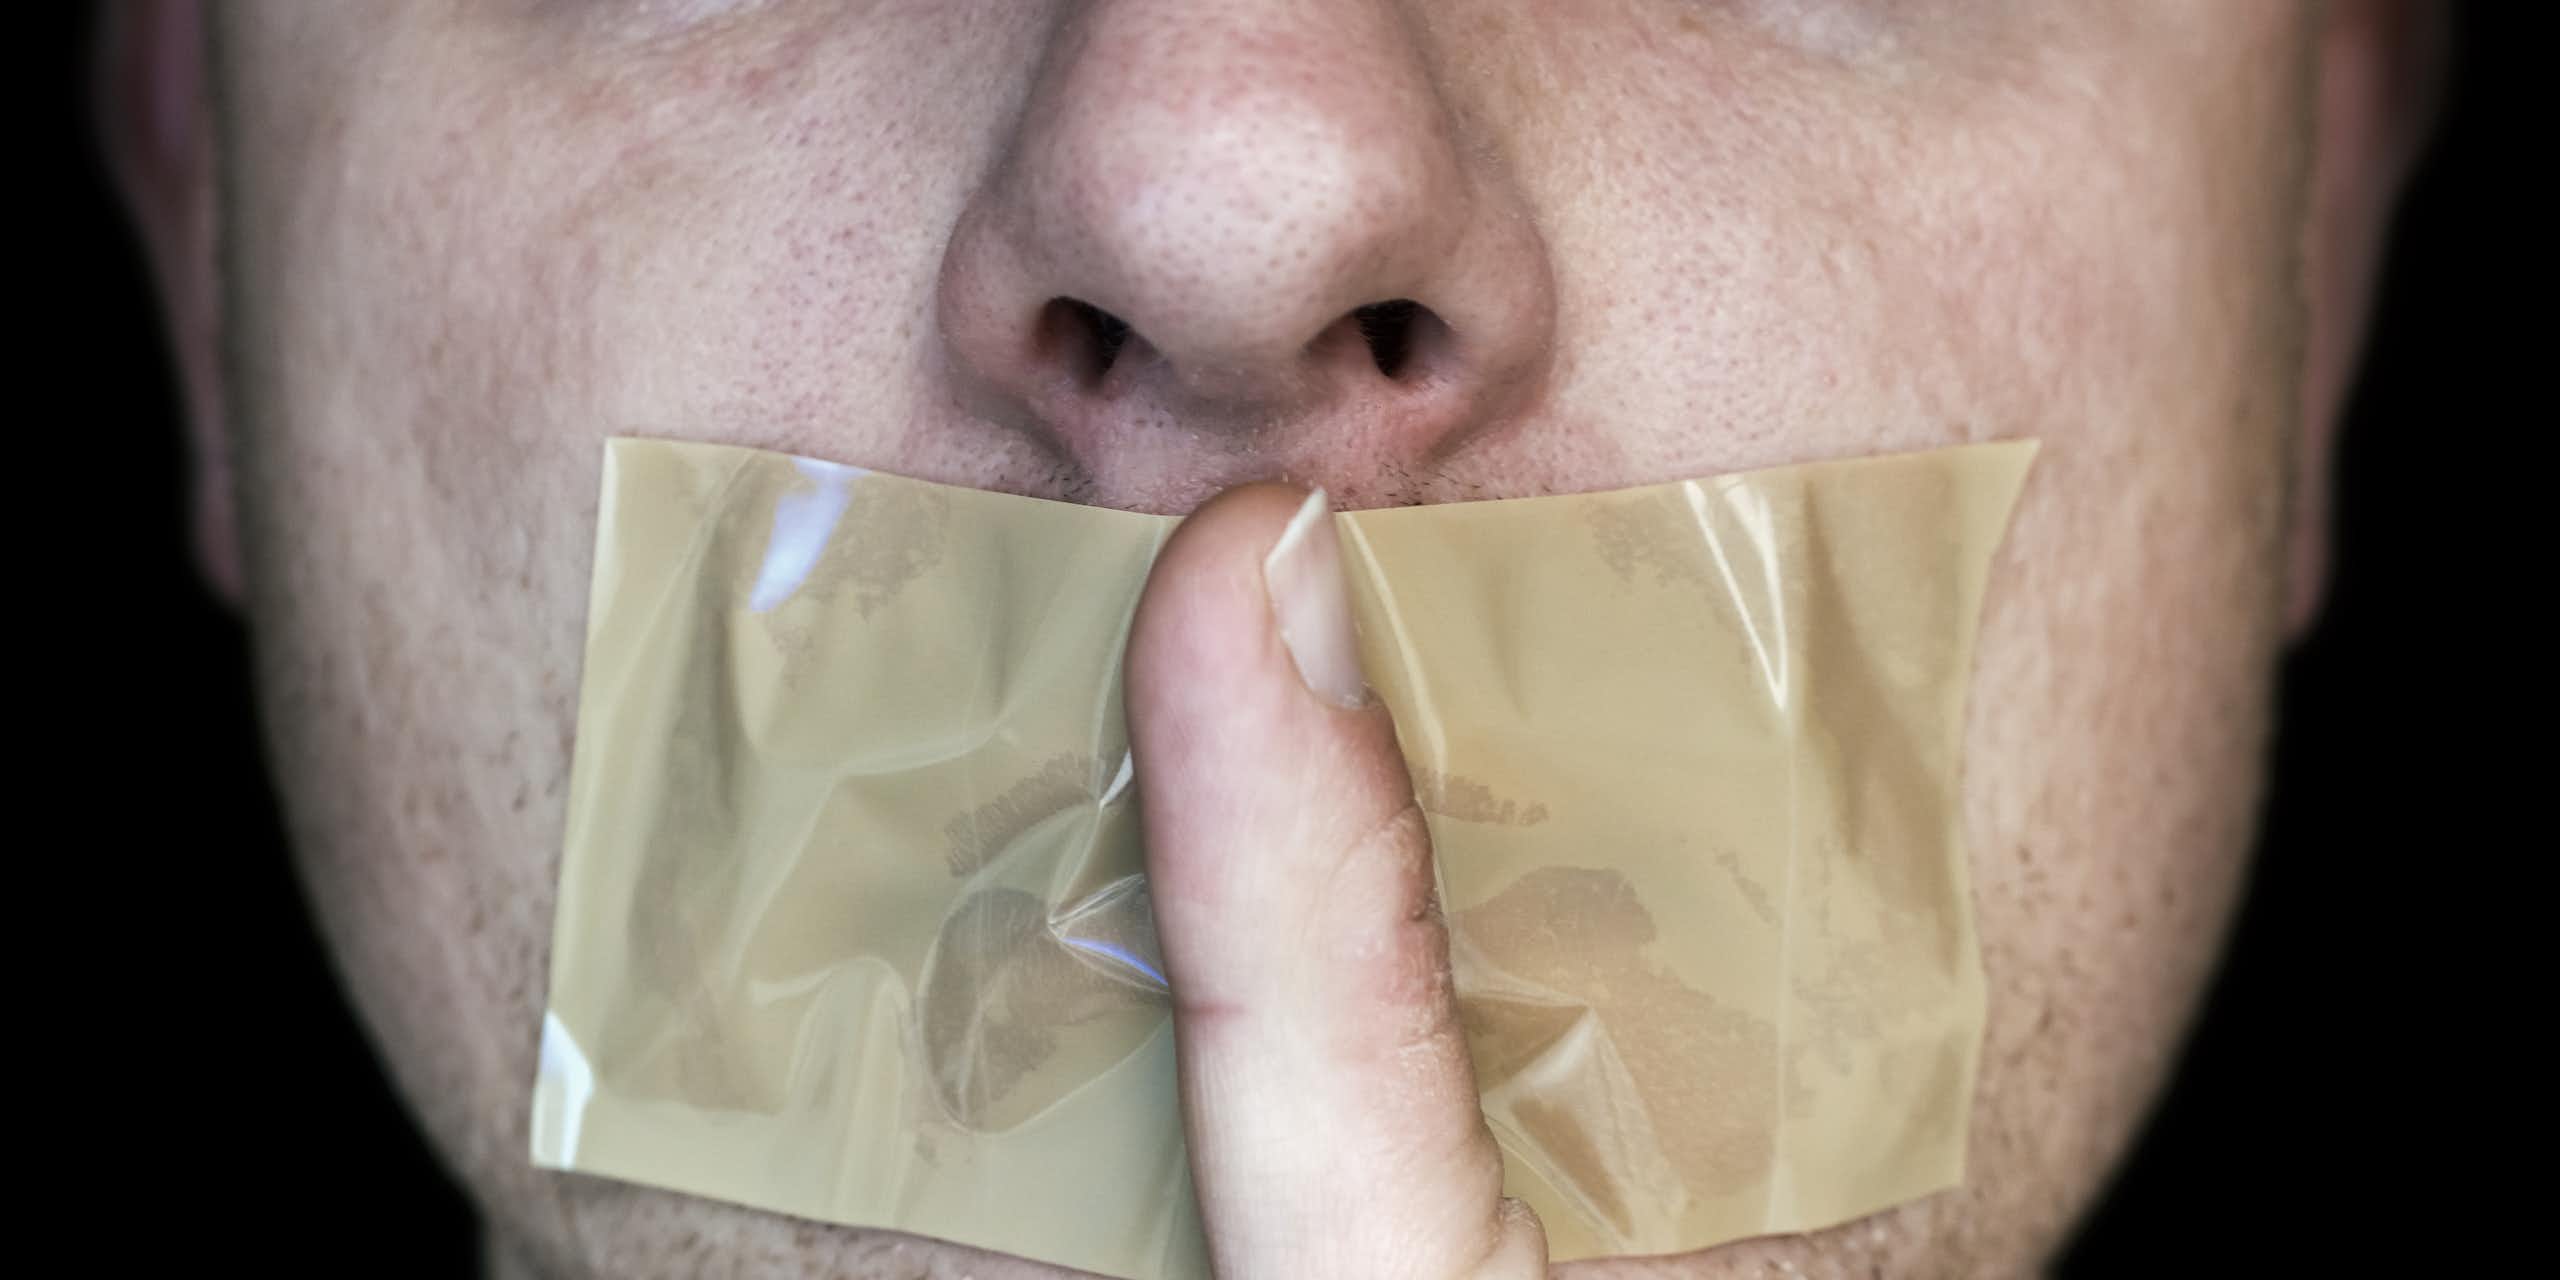 Mouth coverdd in tape, forefinger held in front